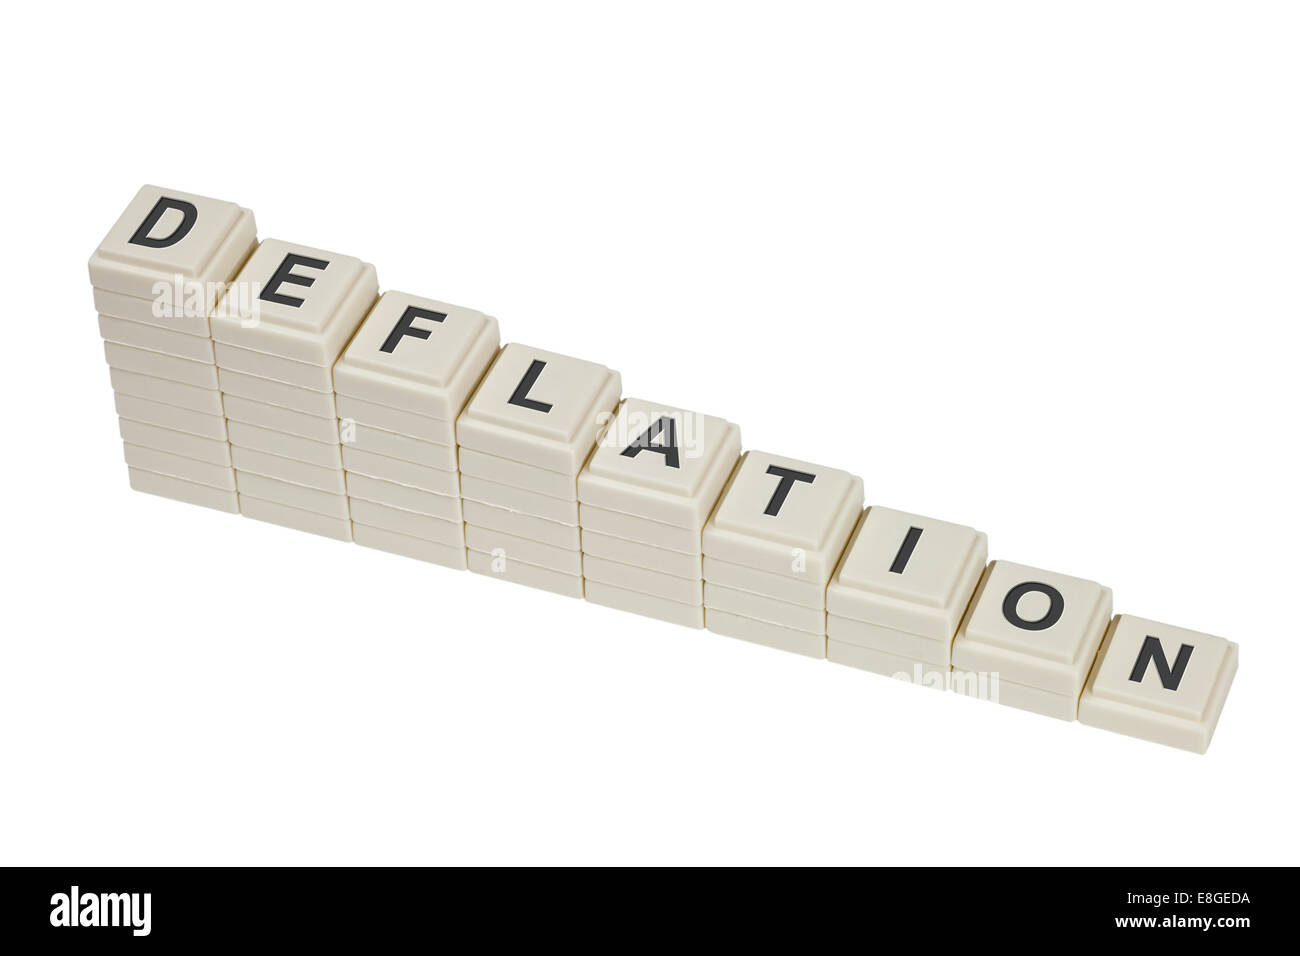 Stack of decreasing blocks showing the word DEFLATION isolated on white background Stock Photo